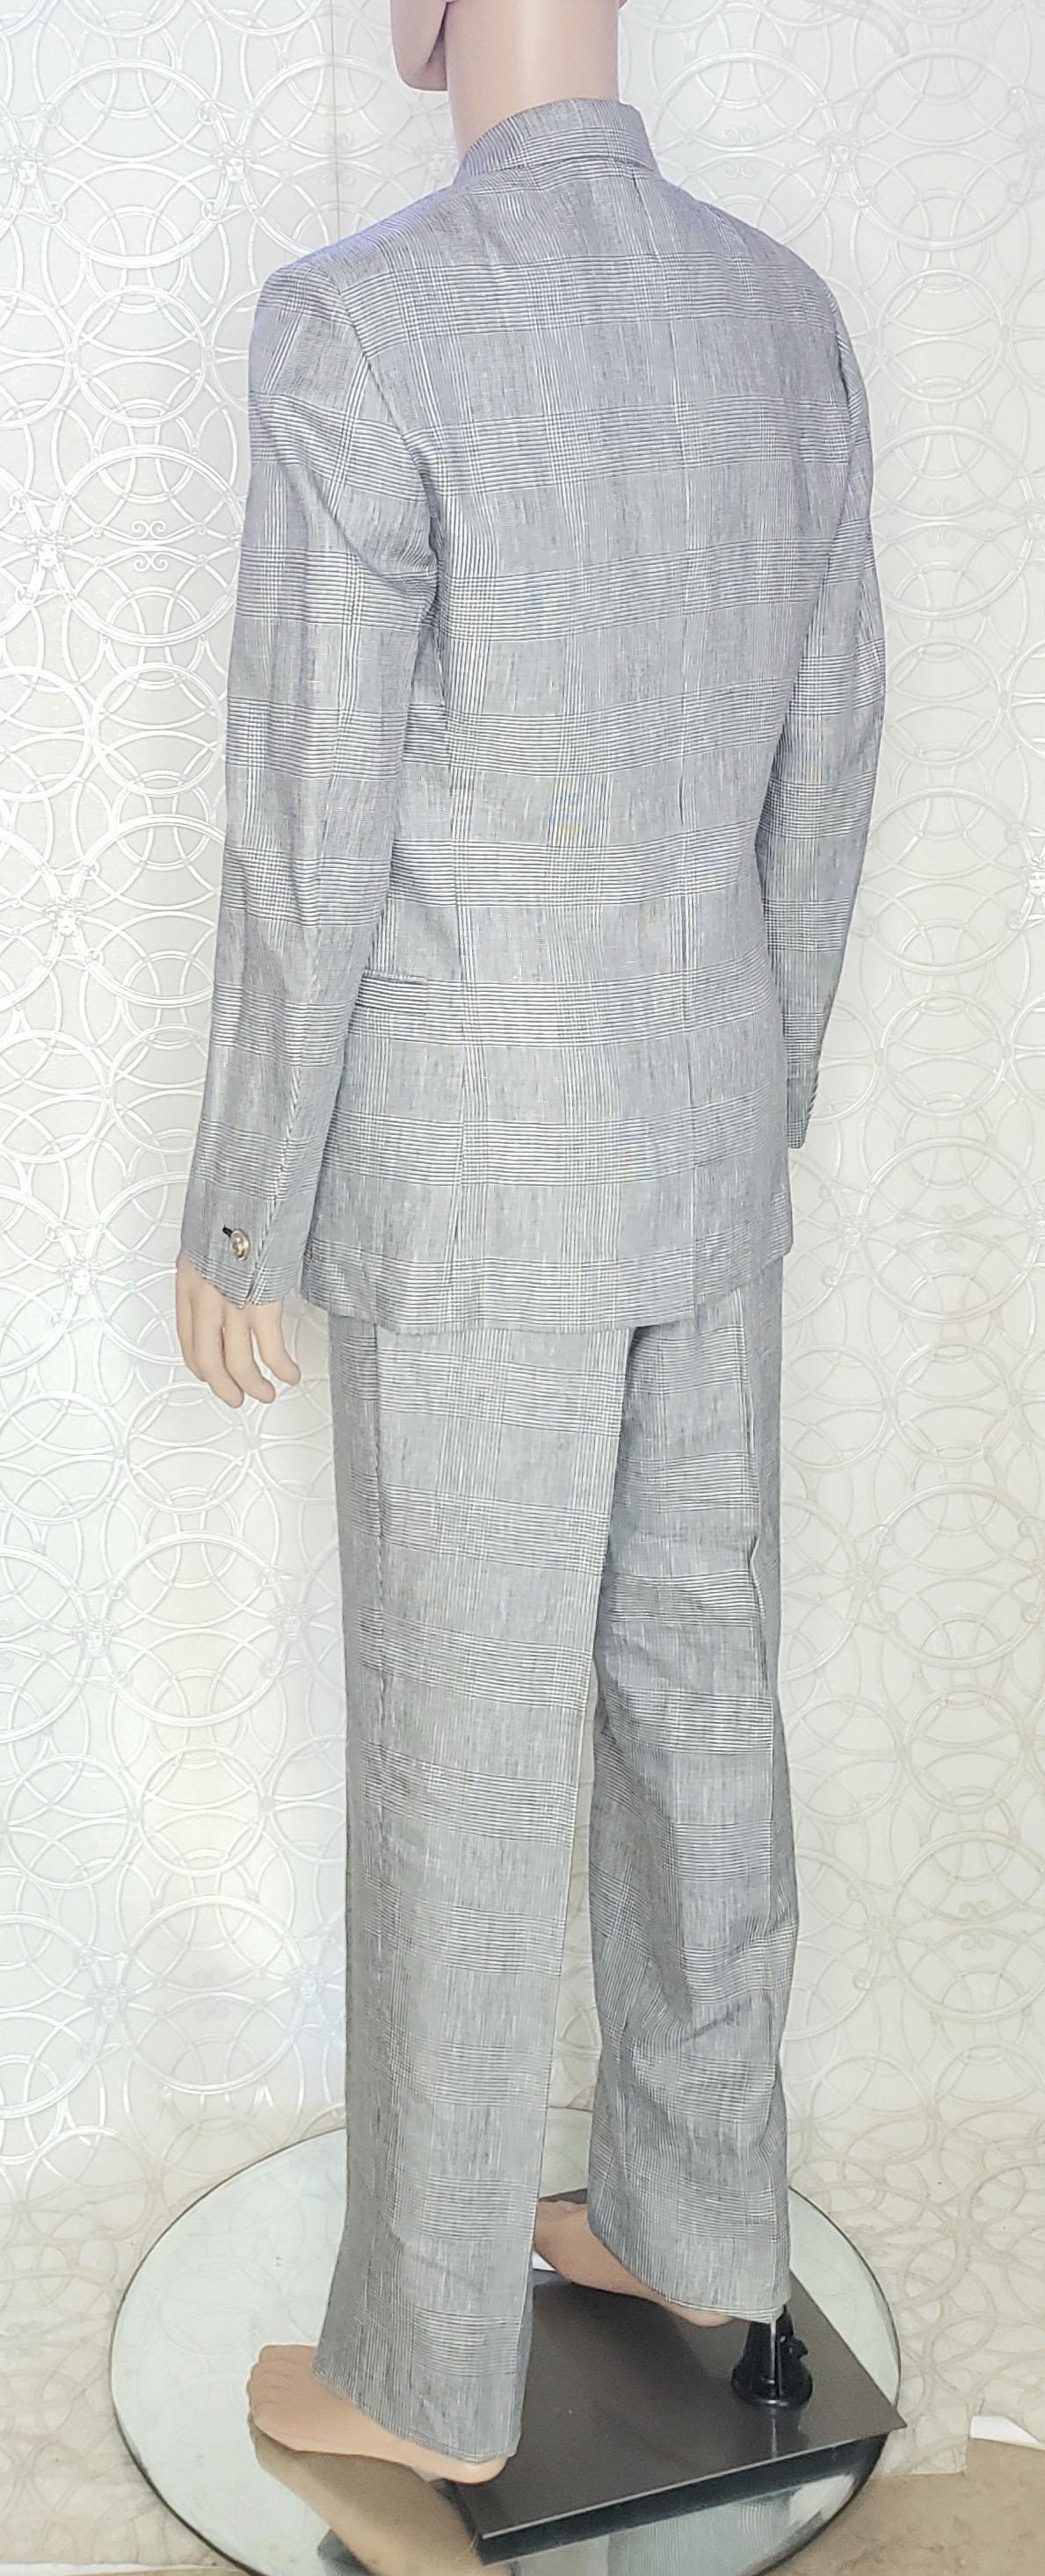 VERSACE S/S 2012 look # 2 BRAND NEW GRAY SUIT 48 - 38 (M) For Sale 1